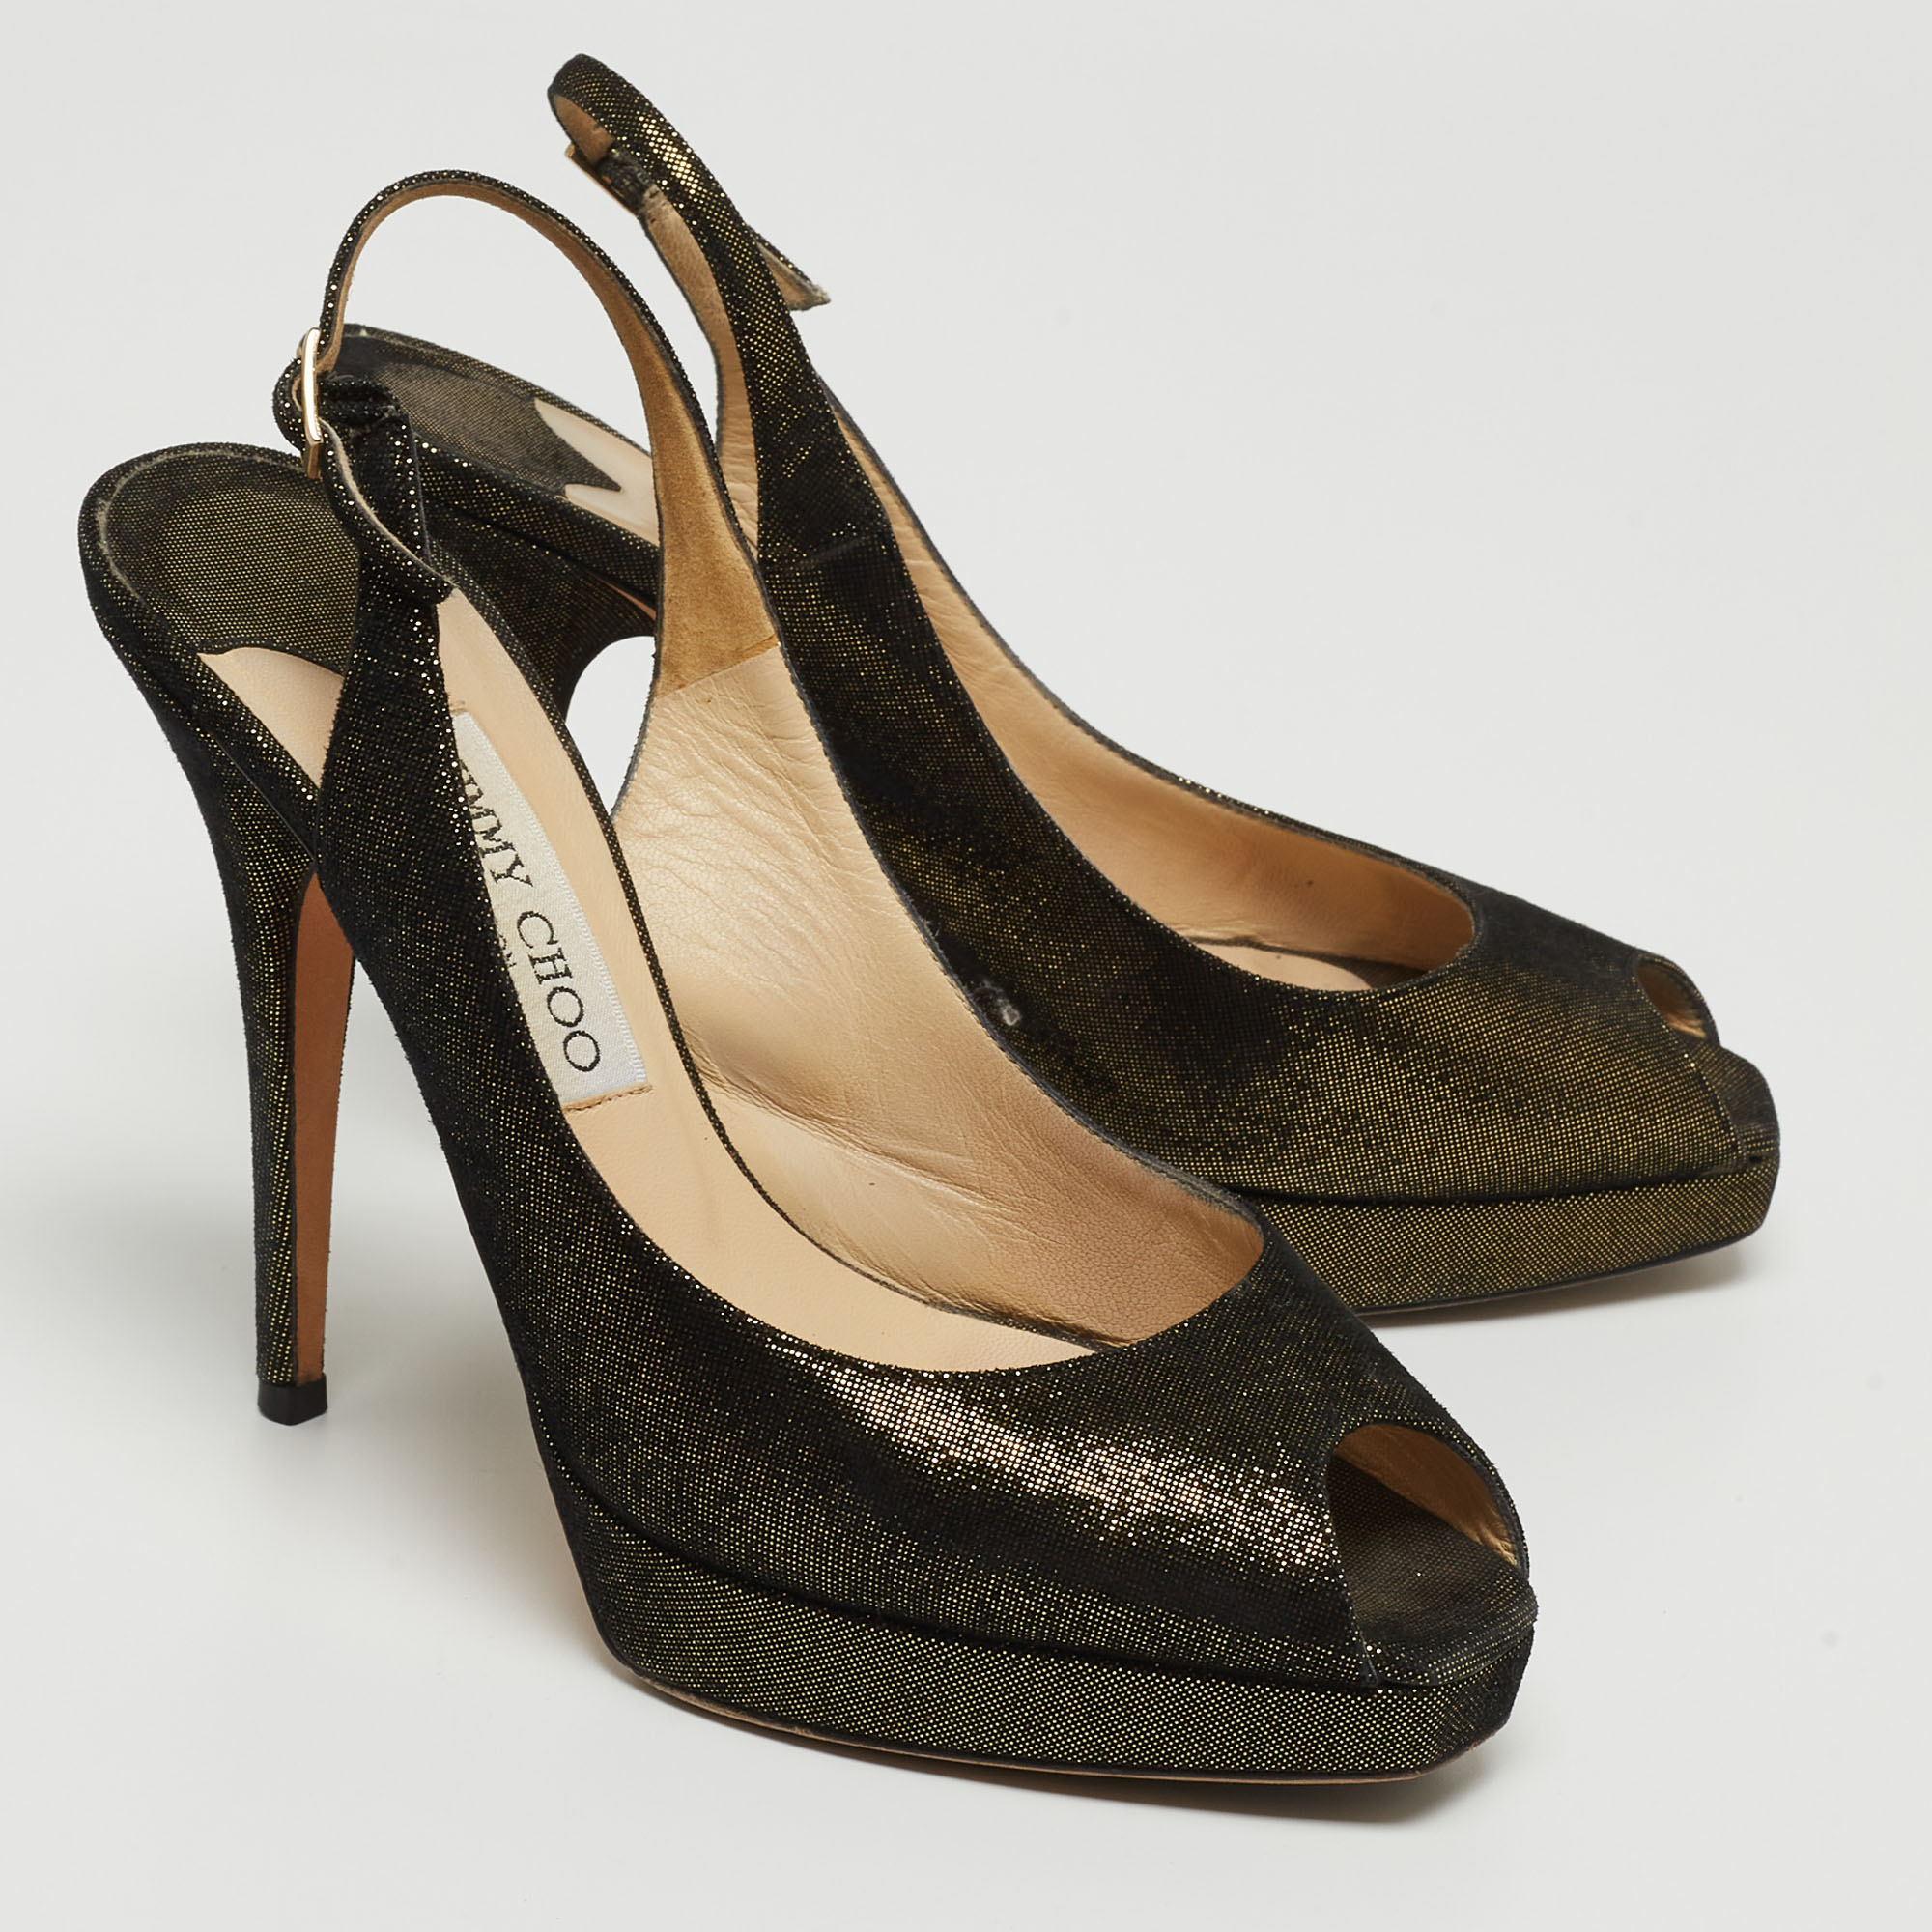 Jimmy Choo Metallic Laminated Suede Clue Slingback Pumps Size 38